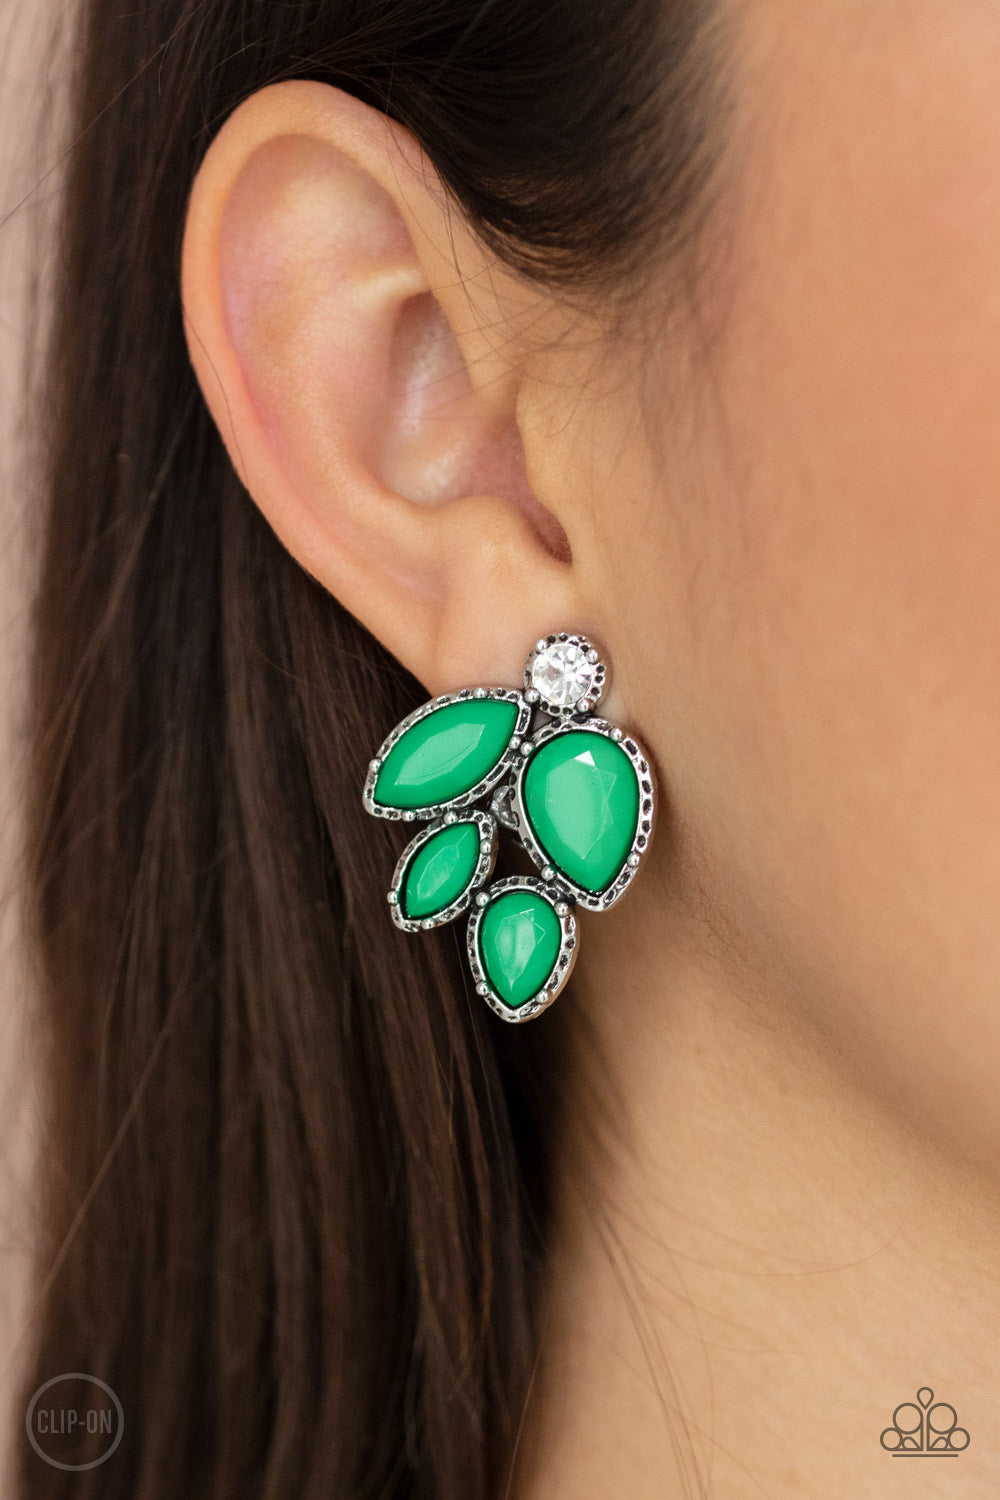 Fancy Foliage Green Clip-On Earring - Paparazzi Accessories  Featuring a dainty white rhinestone, faceted Mint teardrop and marquise beads are pressed into hammered silver fittings that coalesce into a leafy frame. Earring attaches to a standard clip-on fitting.  All Paparazzi Accessories are lead free and nickel free!   Sold as one pair of clip-on earrings.